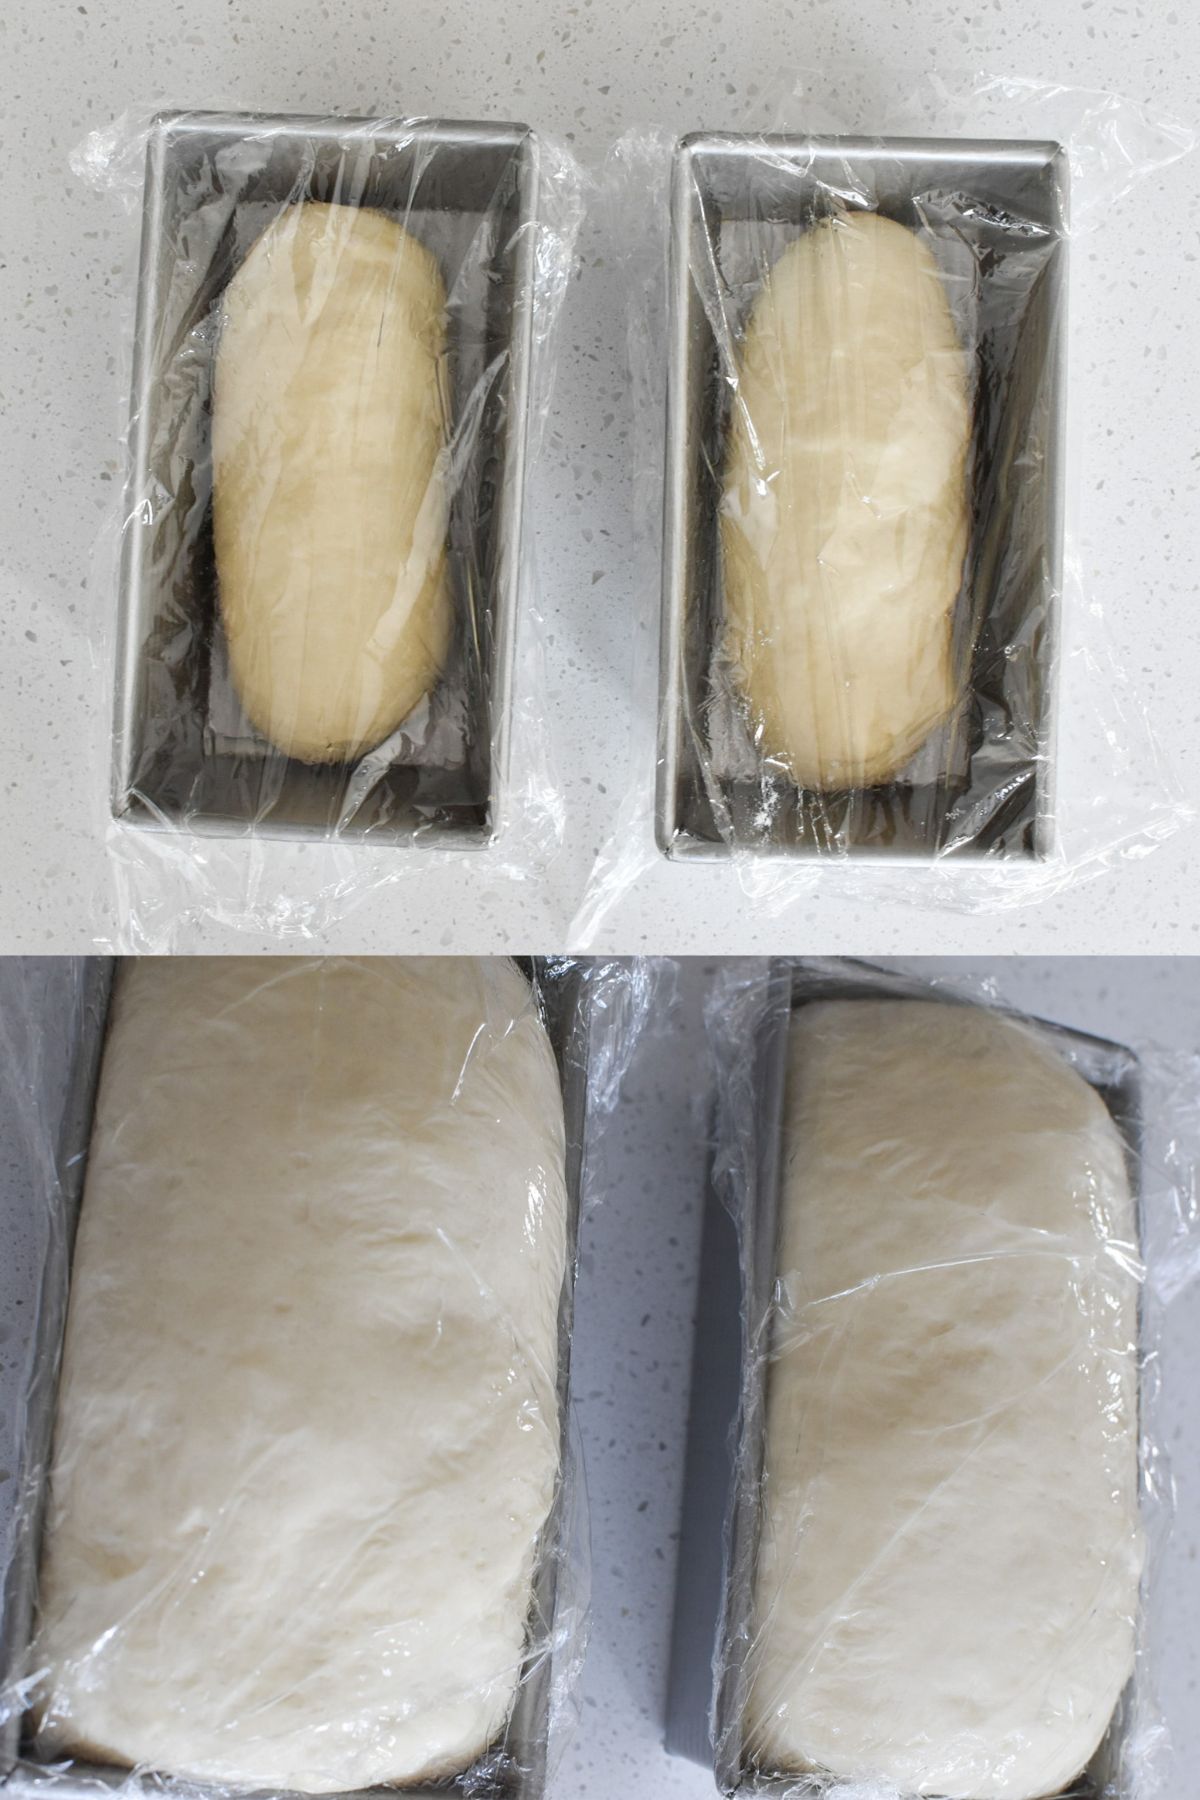 Before and after pictures of dough rising in the bread pans.